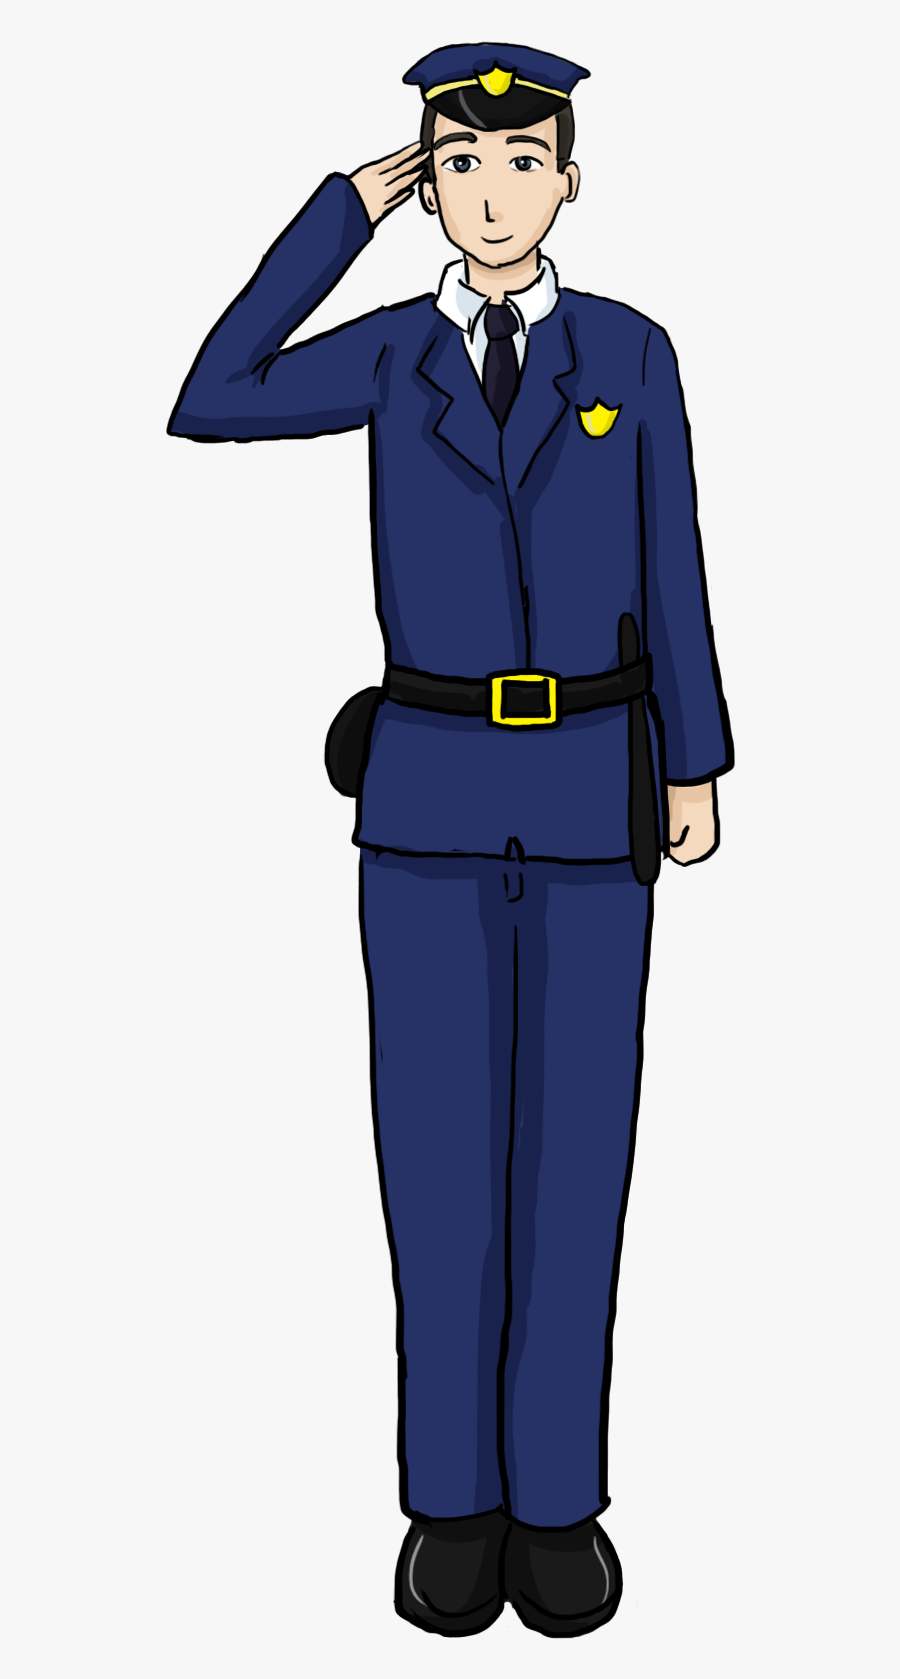 Free Policeman Clip Art - Police Officer Clipart Png, Transparent Clipart